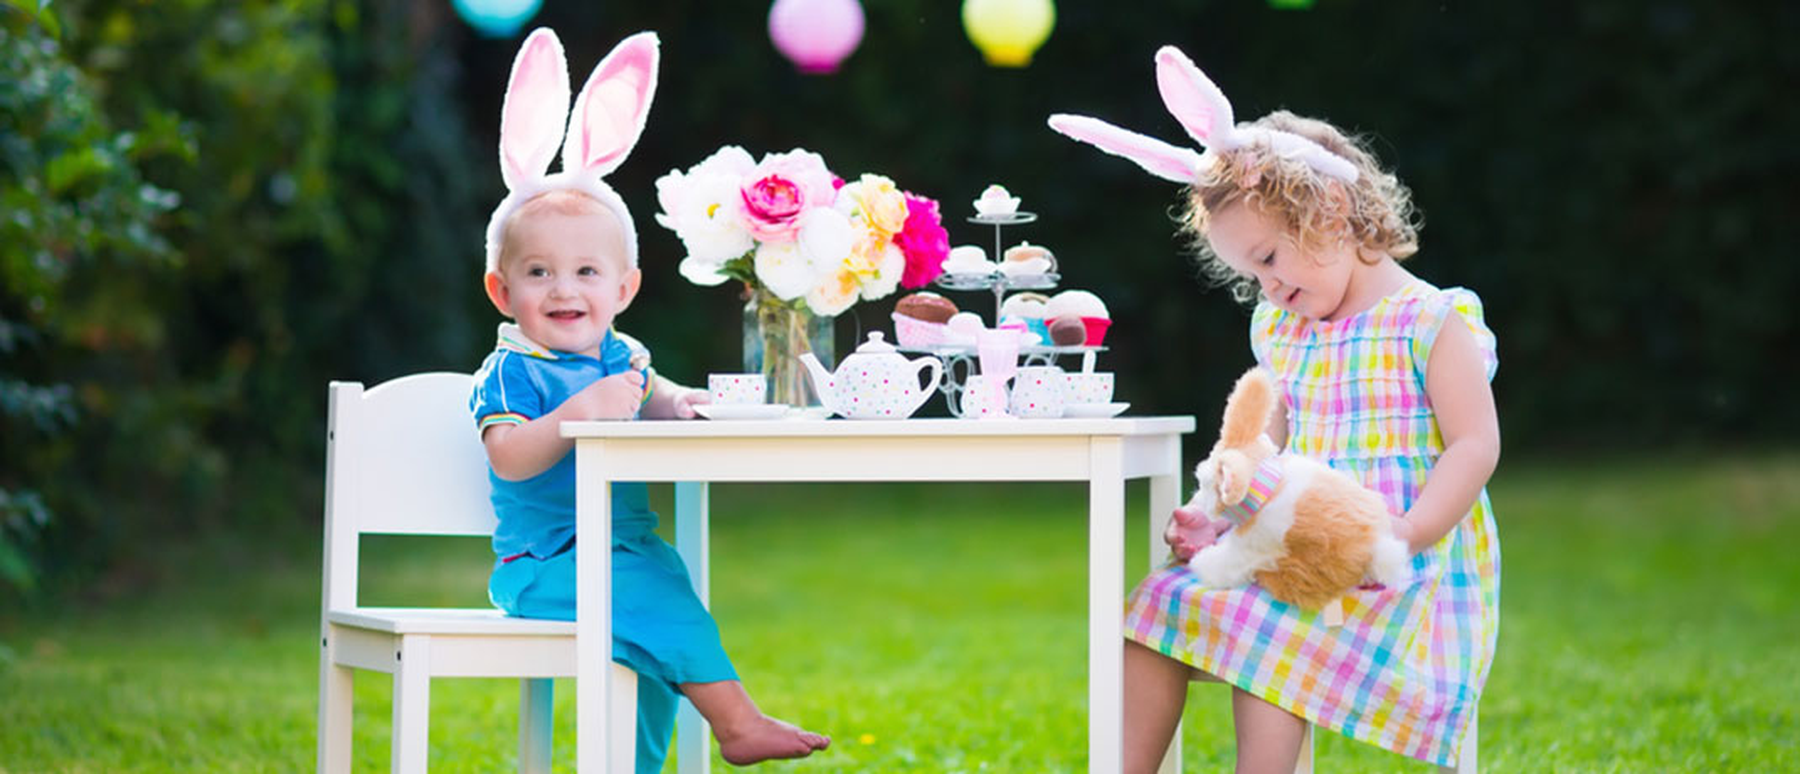 Little kids wearing bunny ears sitting at a table outside